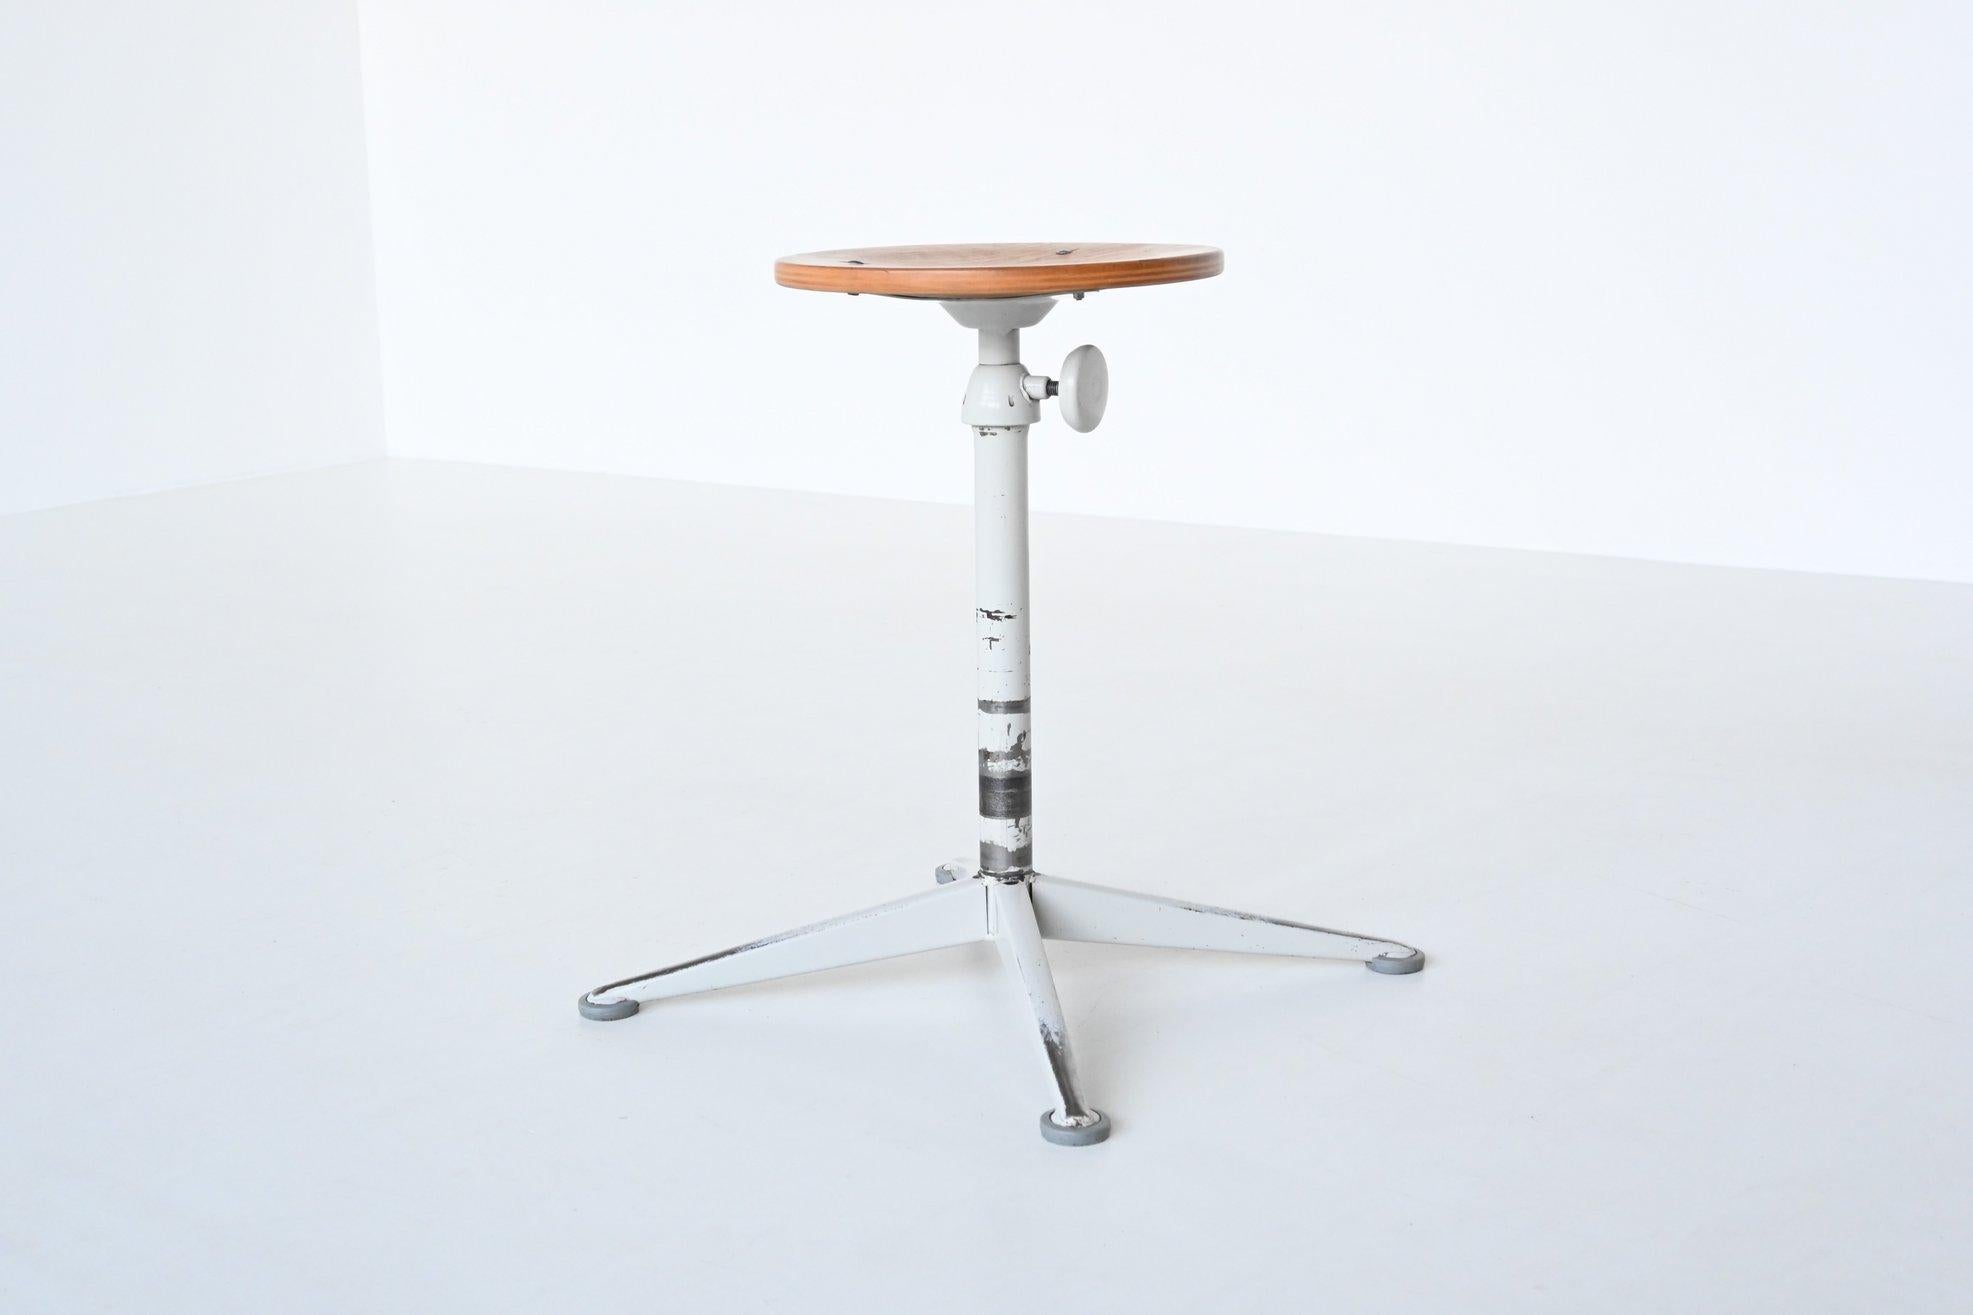 Very nice industrial stool designed by Friso Kramer and manufactured by Ahrend de Cirkel, The Netherlands 1960. It has a light grey lacquered metal frame with a plywood seat. The stool is adjustable in height by using the rotary knob on the side. It